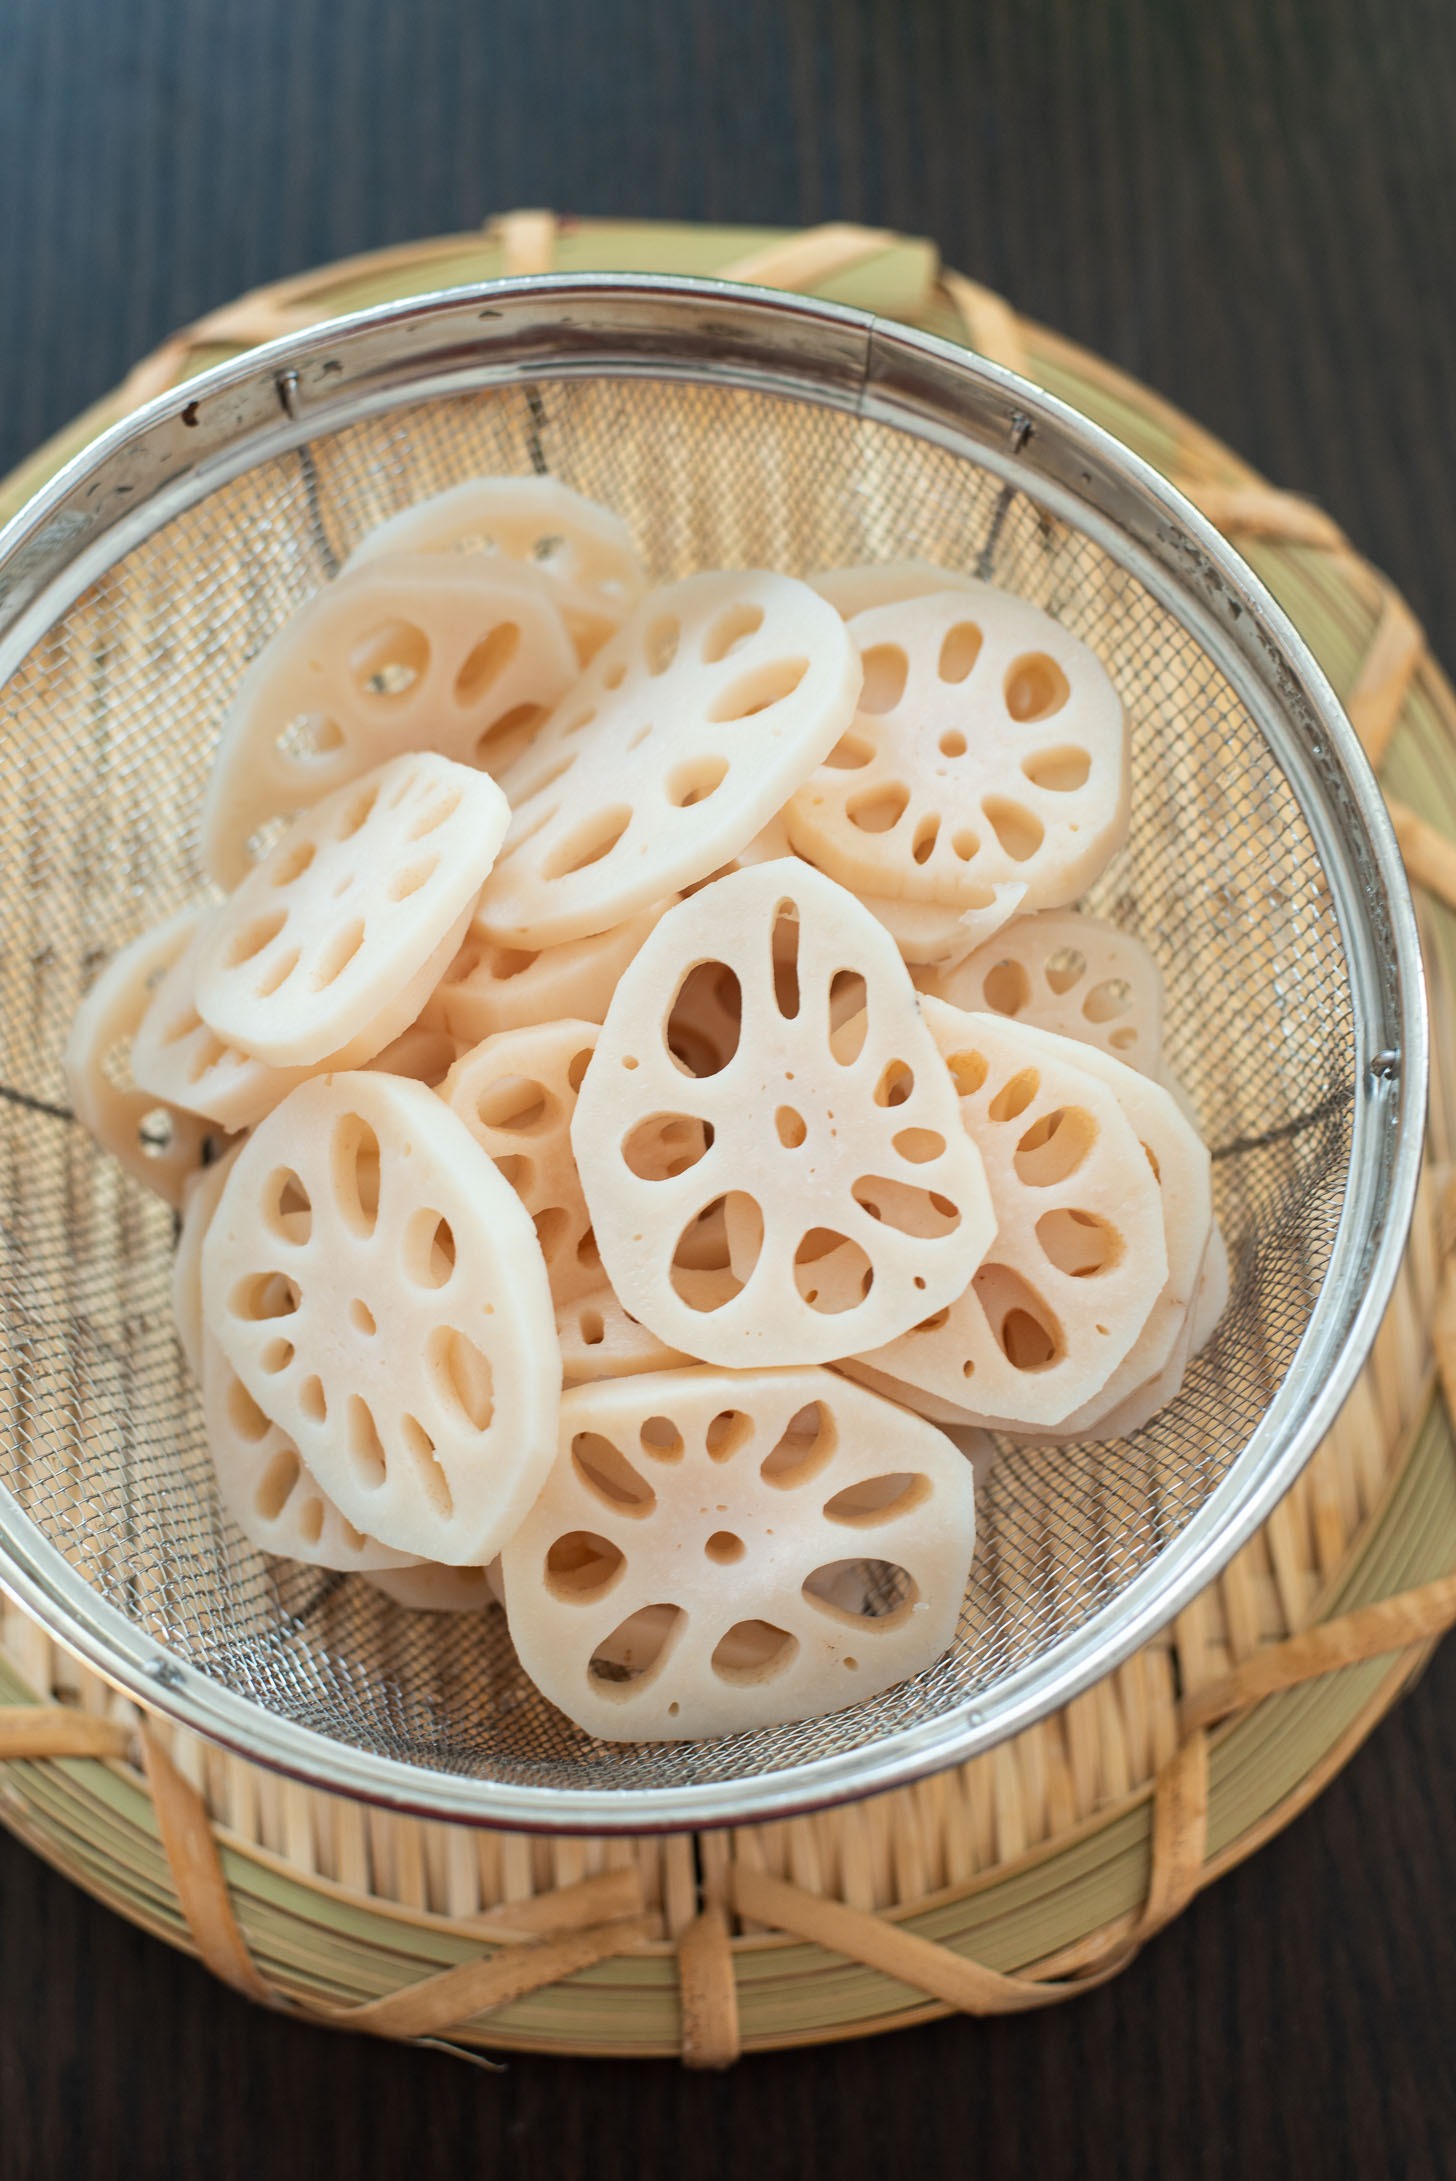 Boiled lotus root slices are drained in a colander.